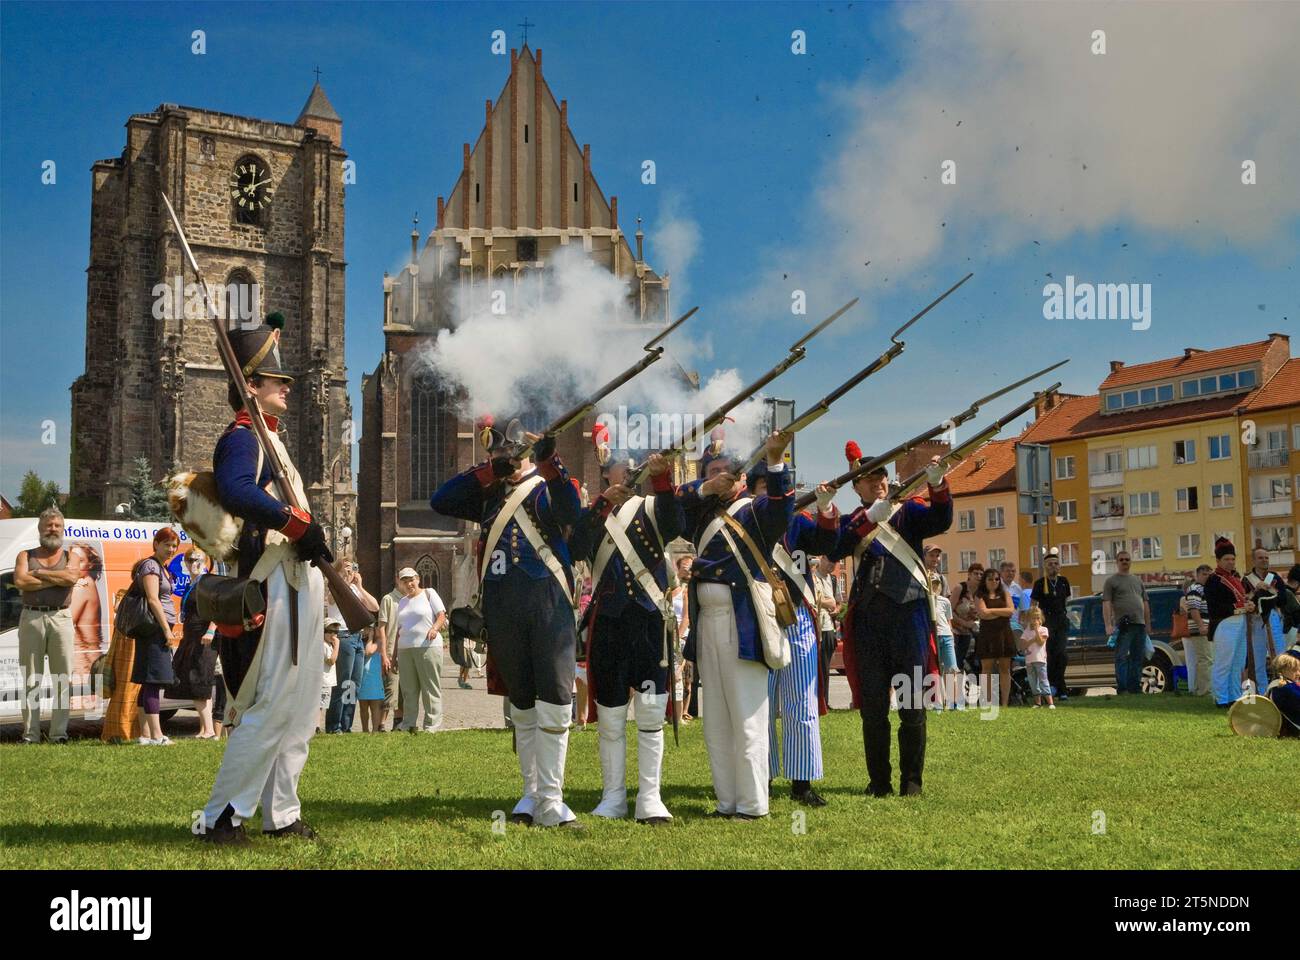 Reenactors in historic uniforms firing muskets before Reenactment of Siege of Neisse during Napoleonic War with Prussia in 1807, in Nysa, Poland Stock Photo